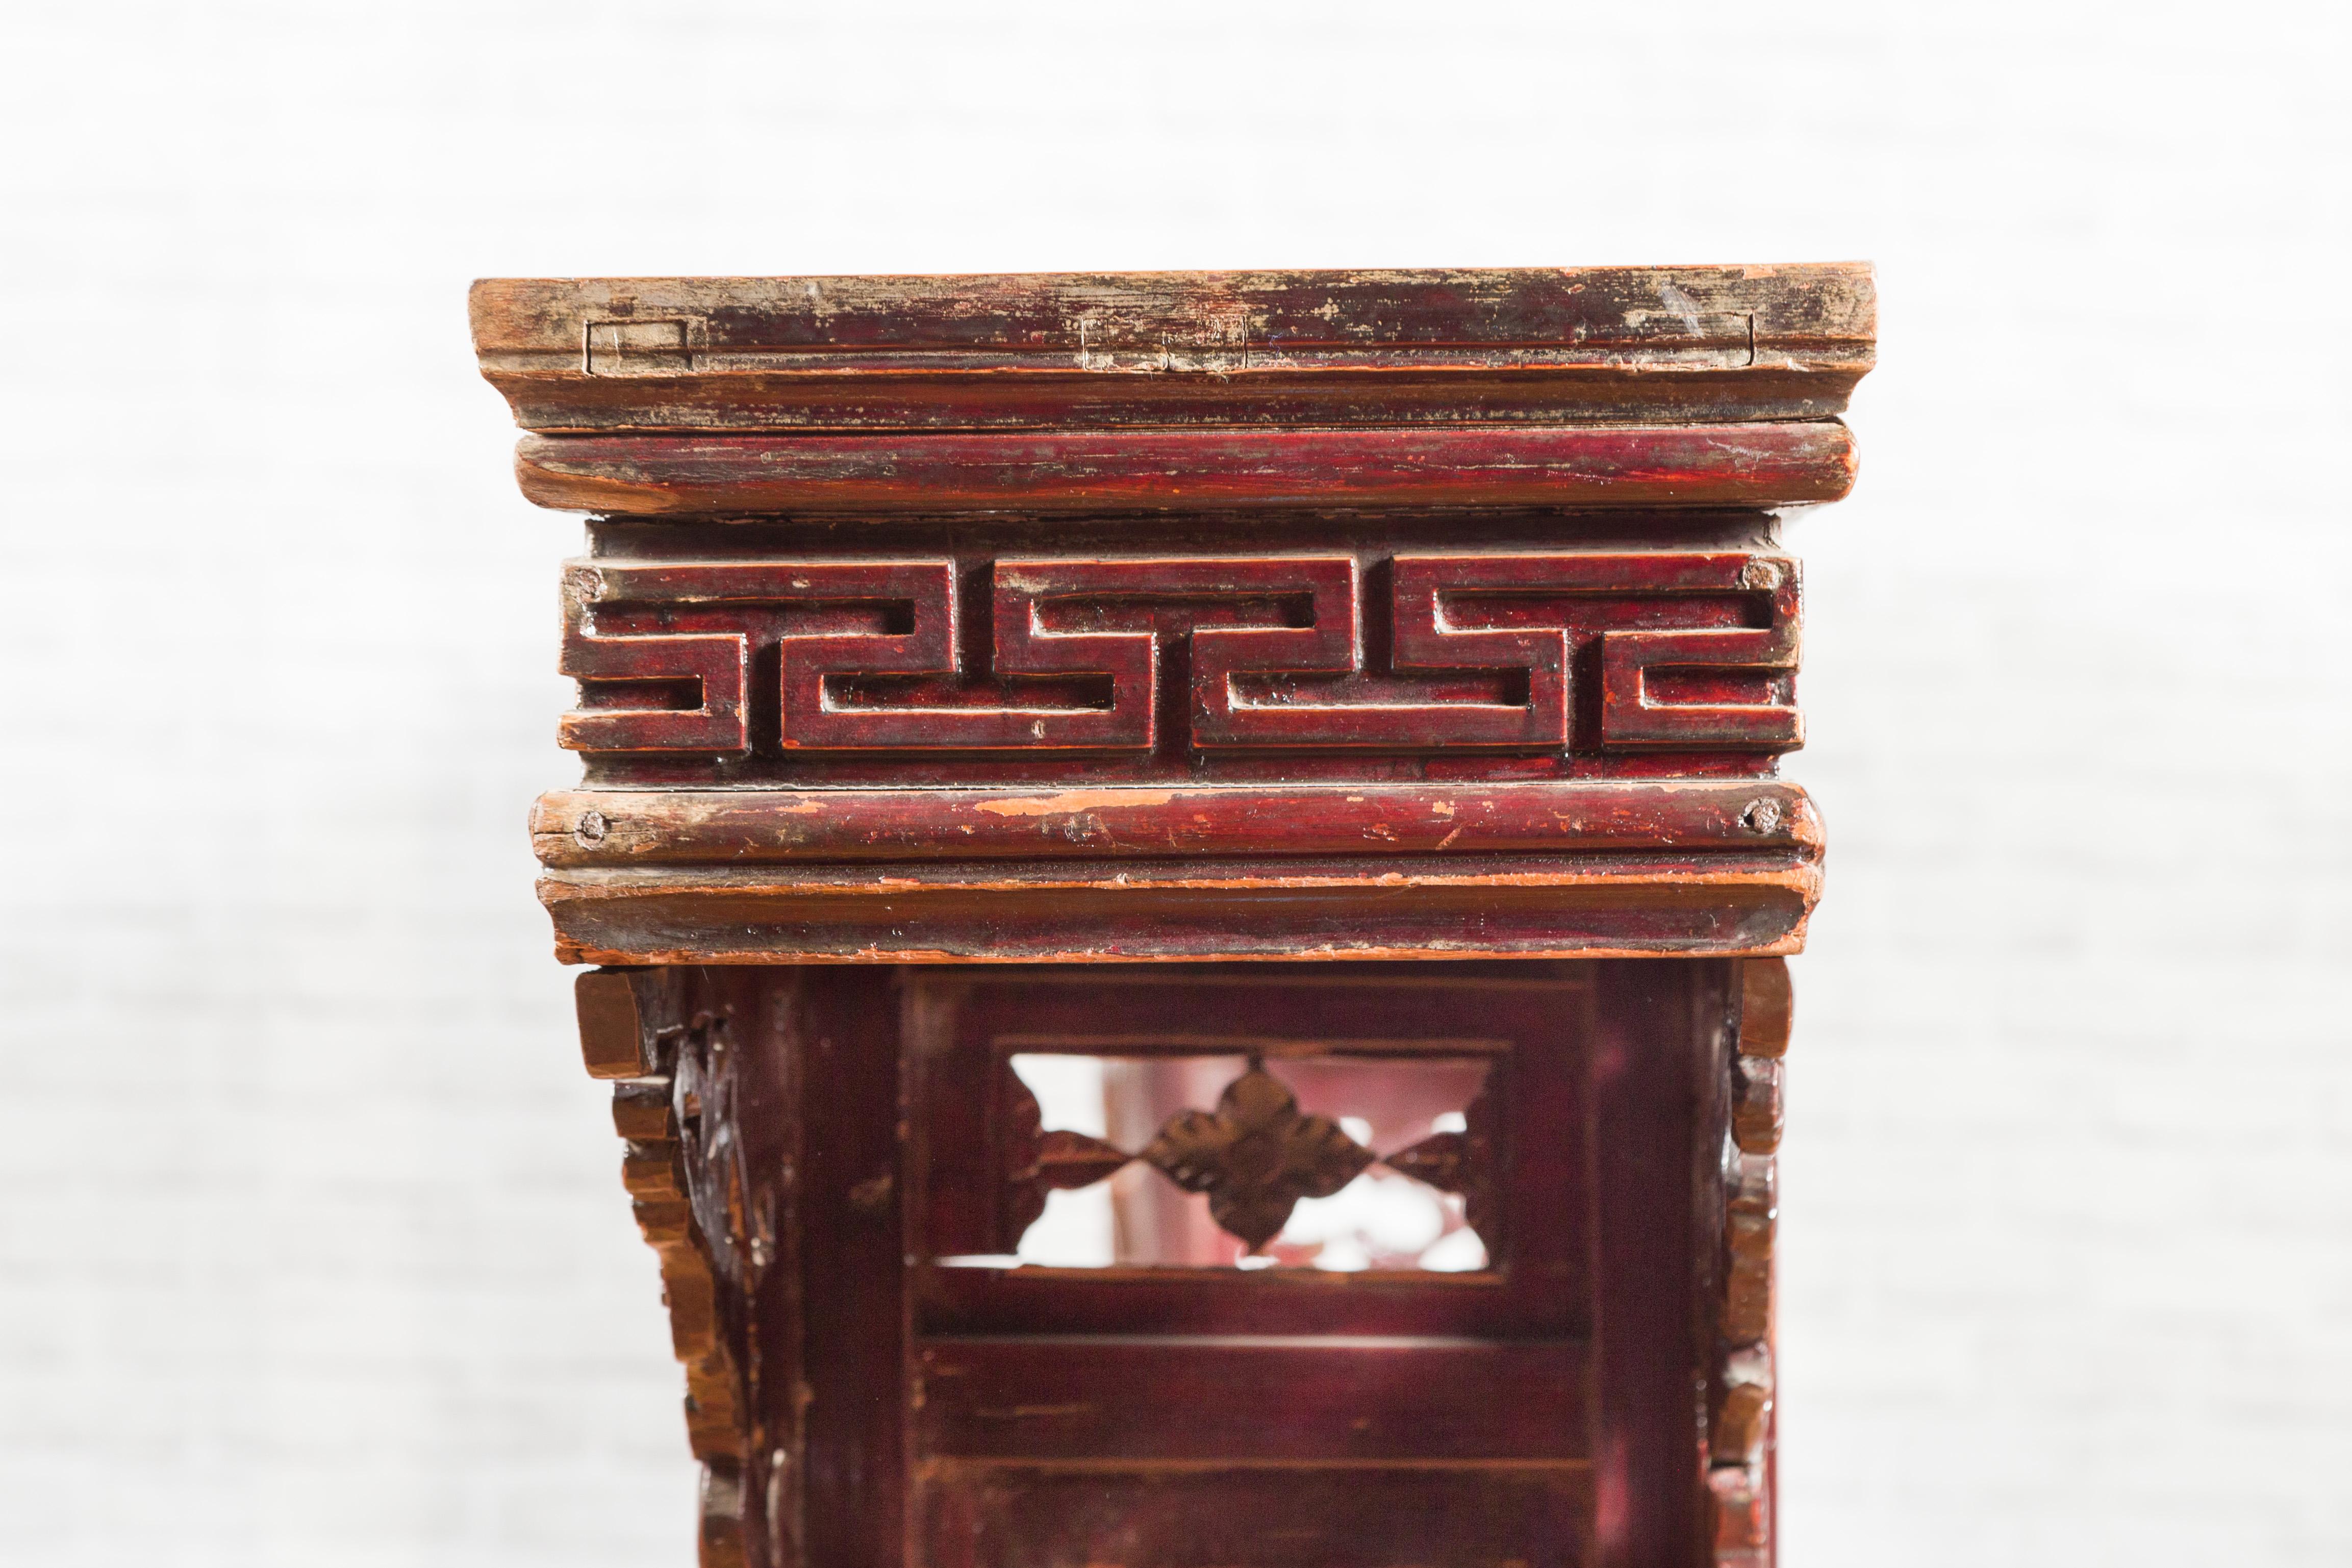 Large Qing Dynasty Chinese Altar Console Table with Fretwork and Dragon Motifs For Sale 4